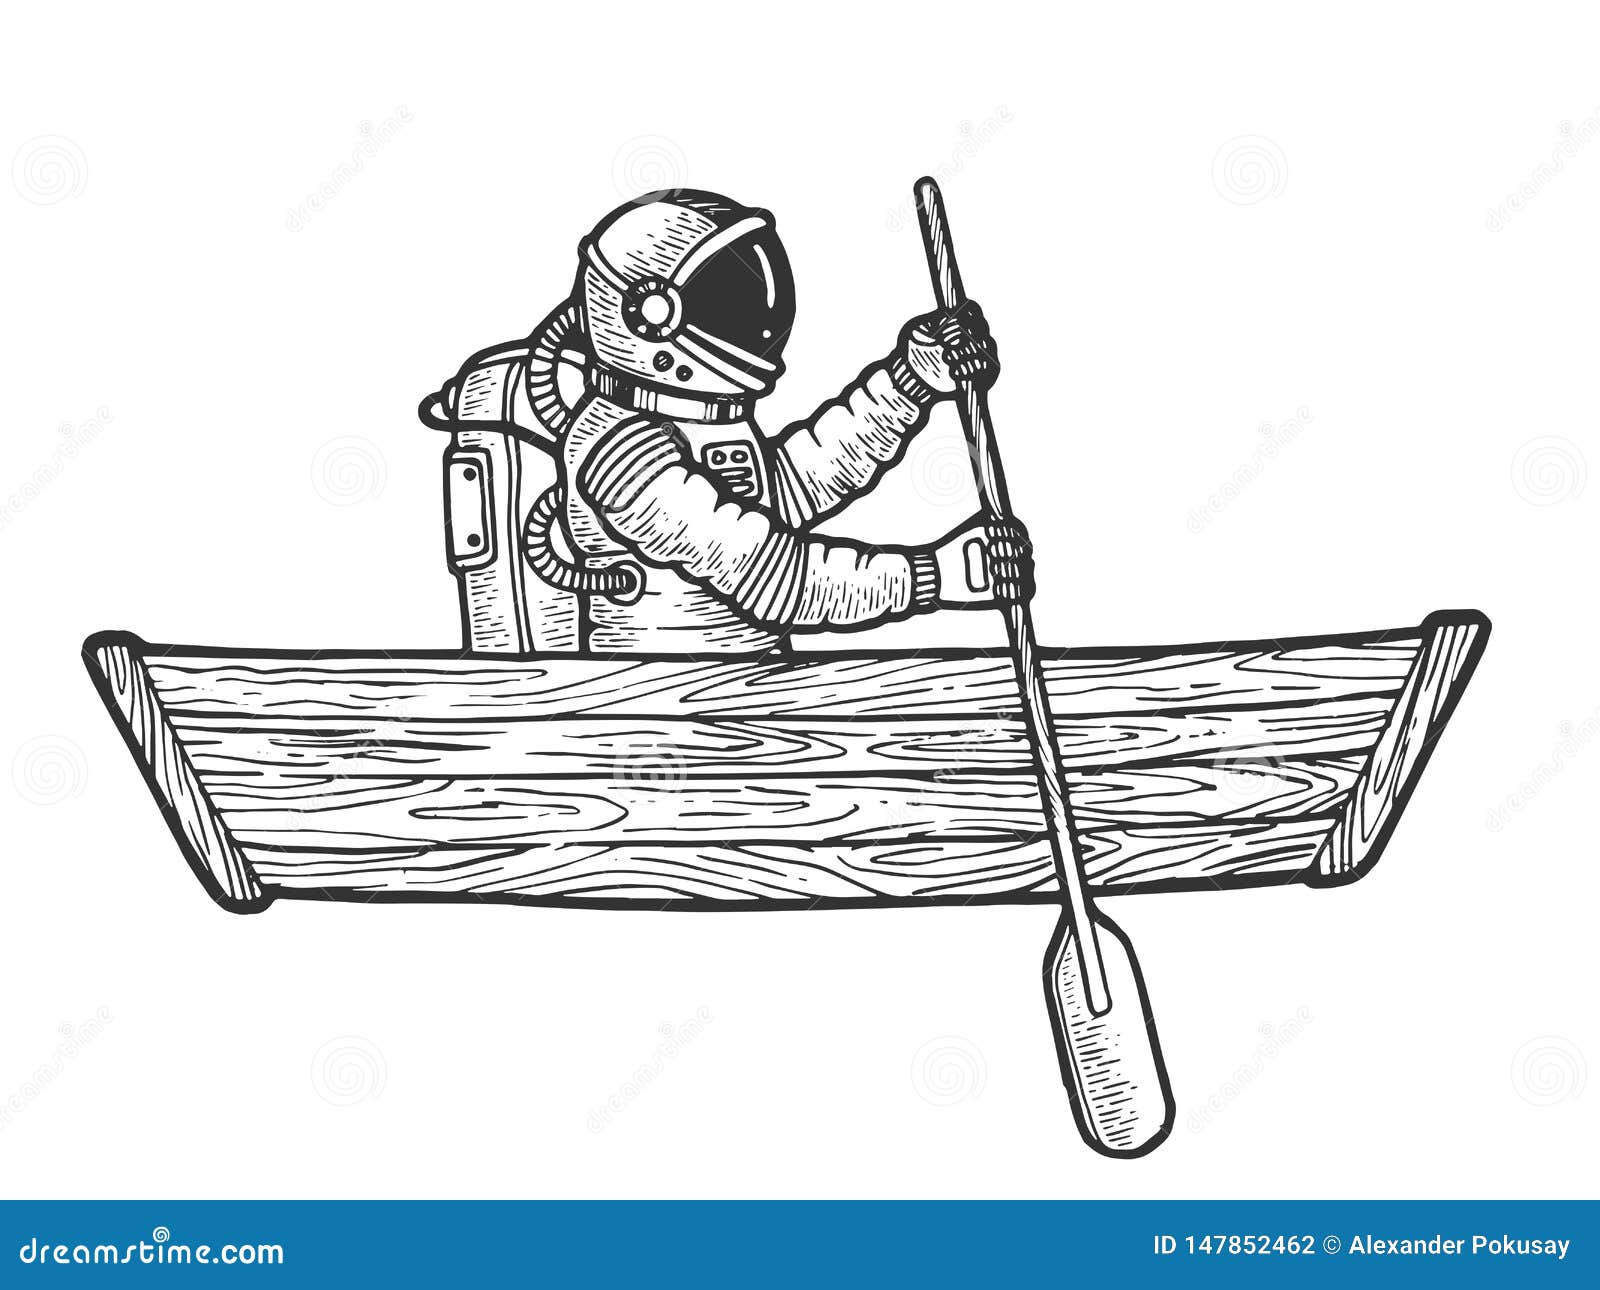 Sail boat sketch, illustration, vector on white background. | CanStock